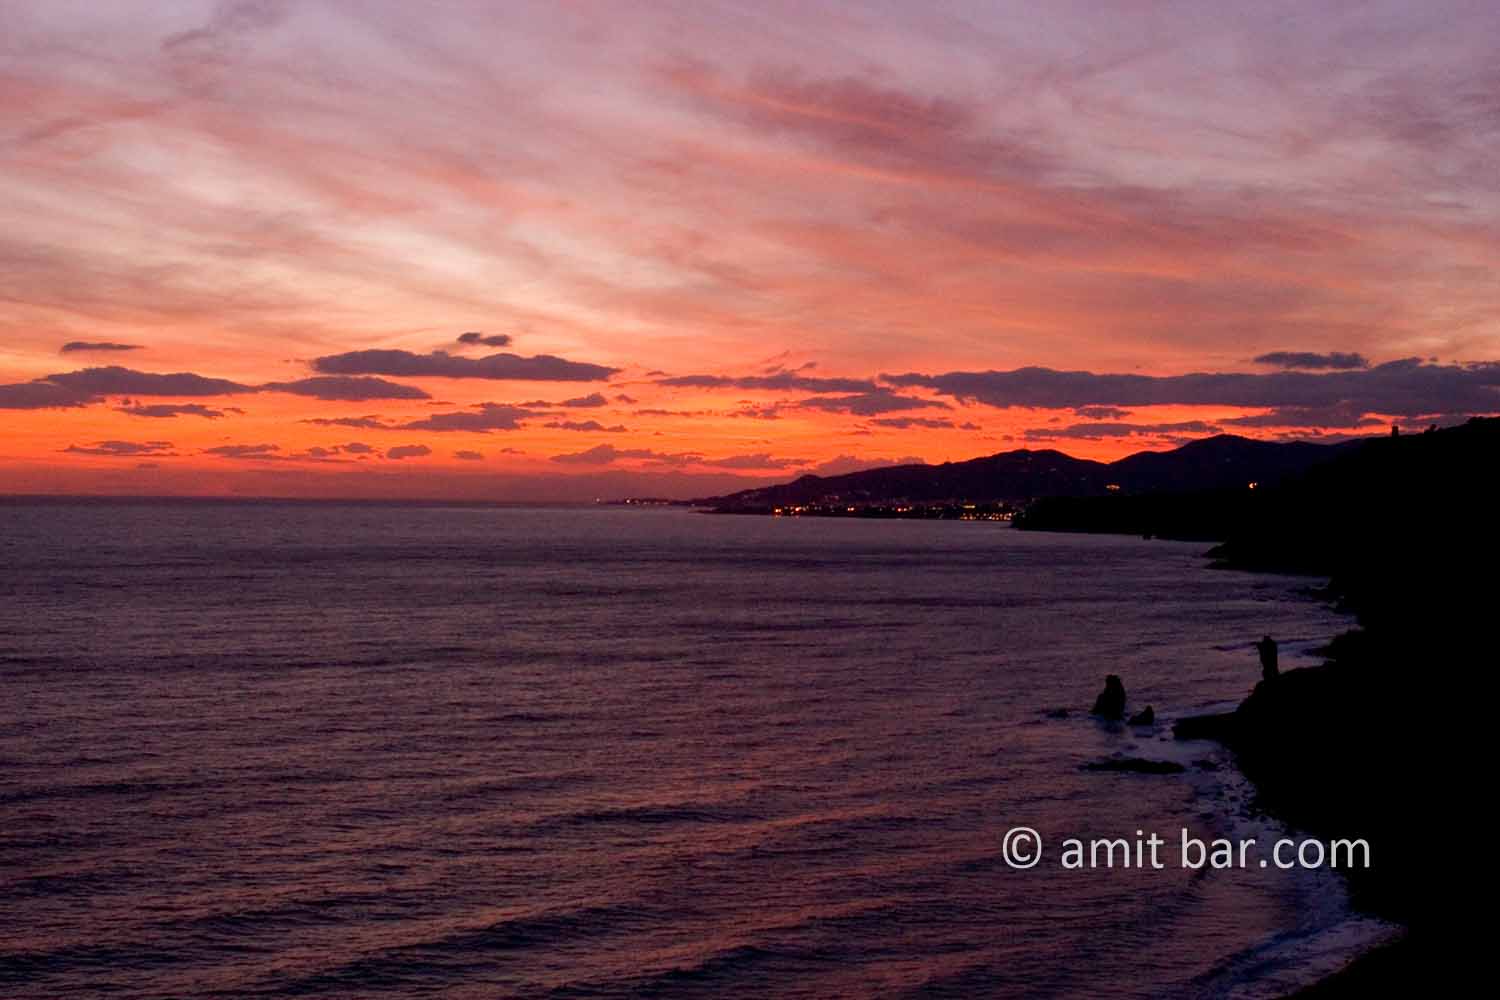 Spanish sunset: Sunset in the south of Spain